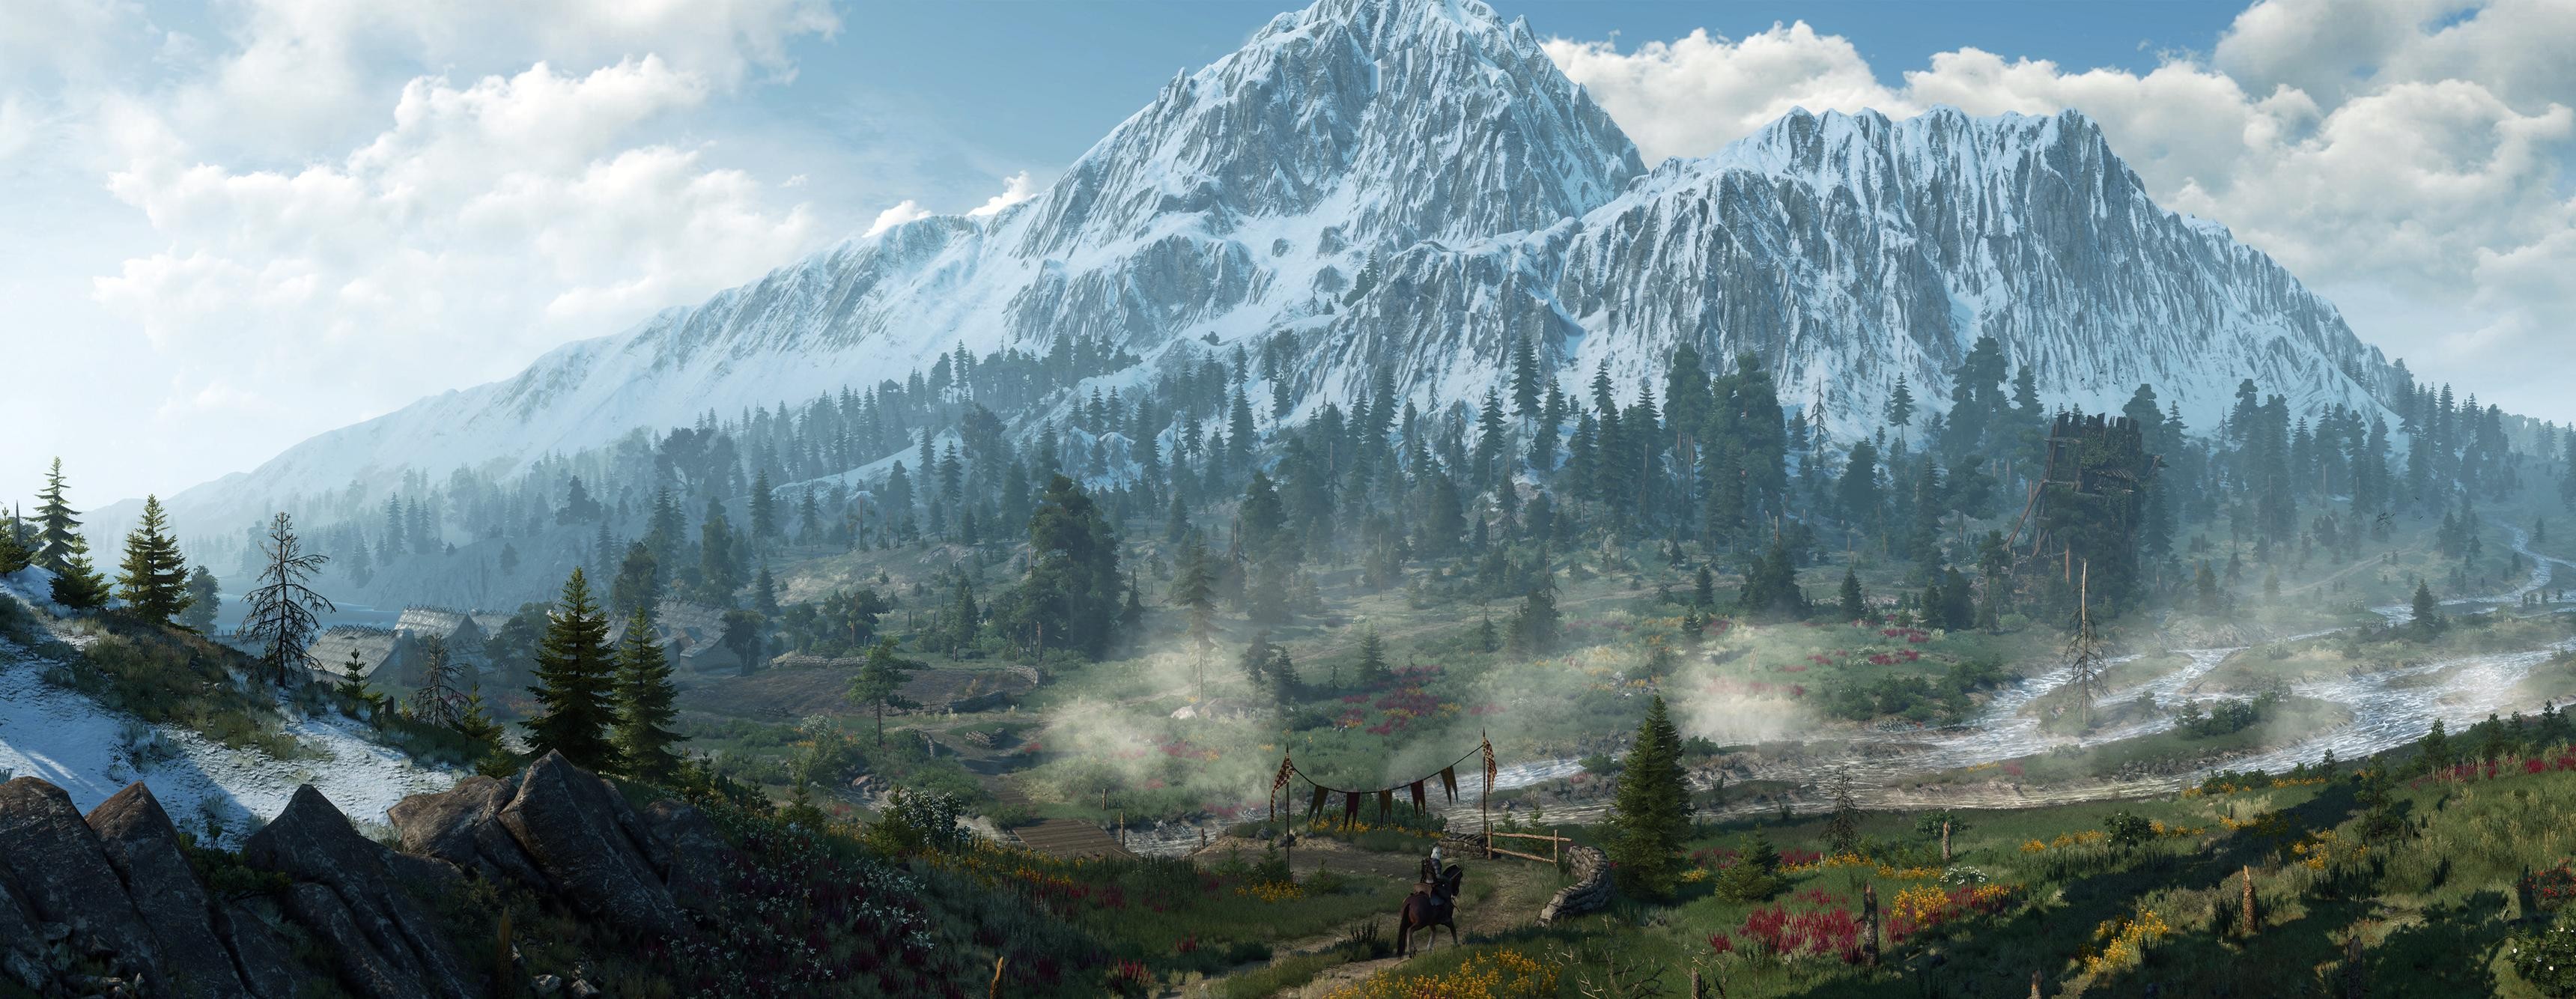 Ultrawide Landscape Nature Photography The Witcher The Witcher 3 Wild Hunt Skellige 3440x1334